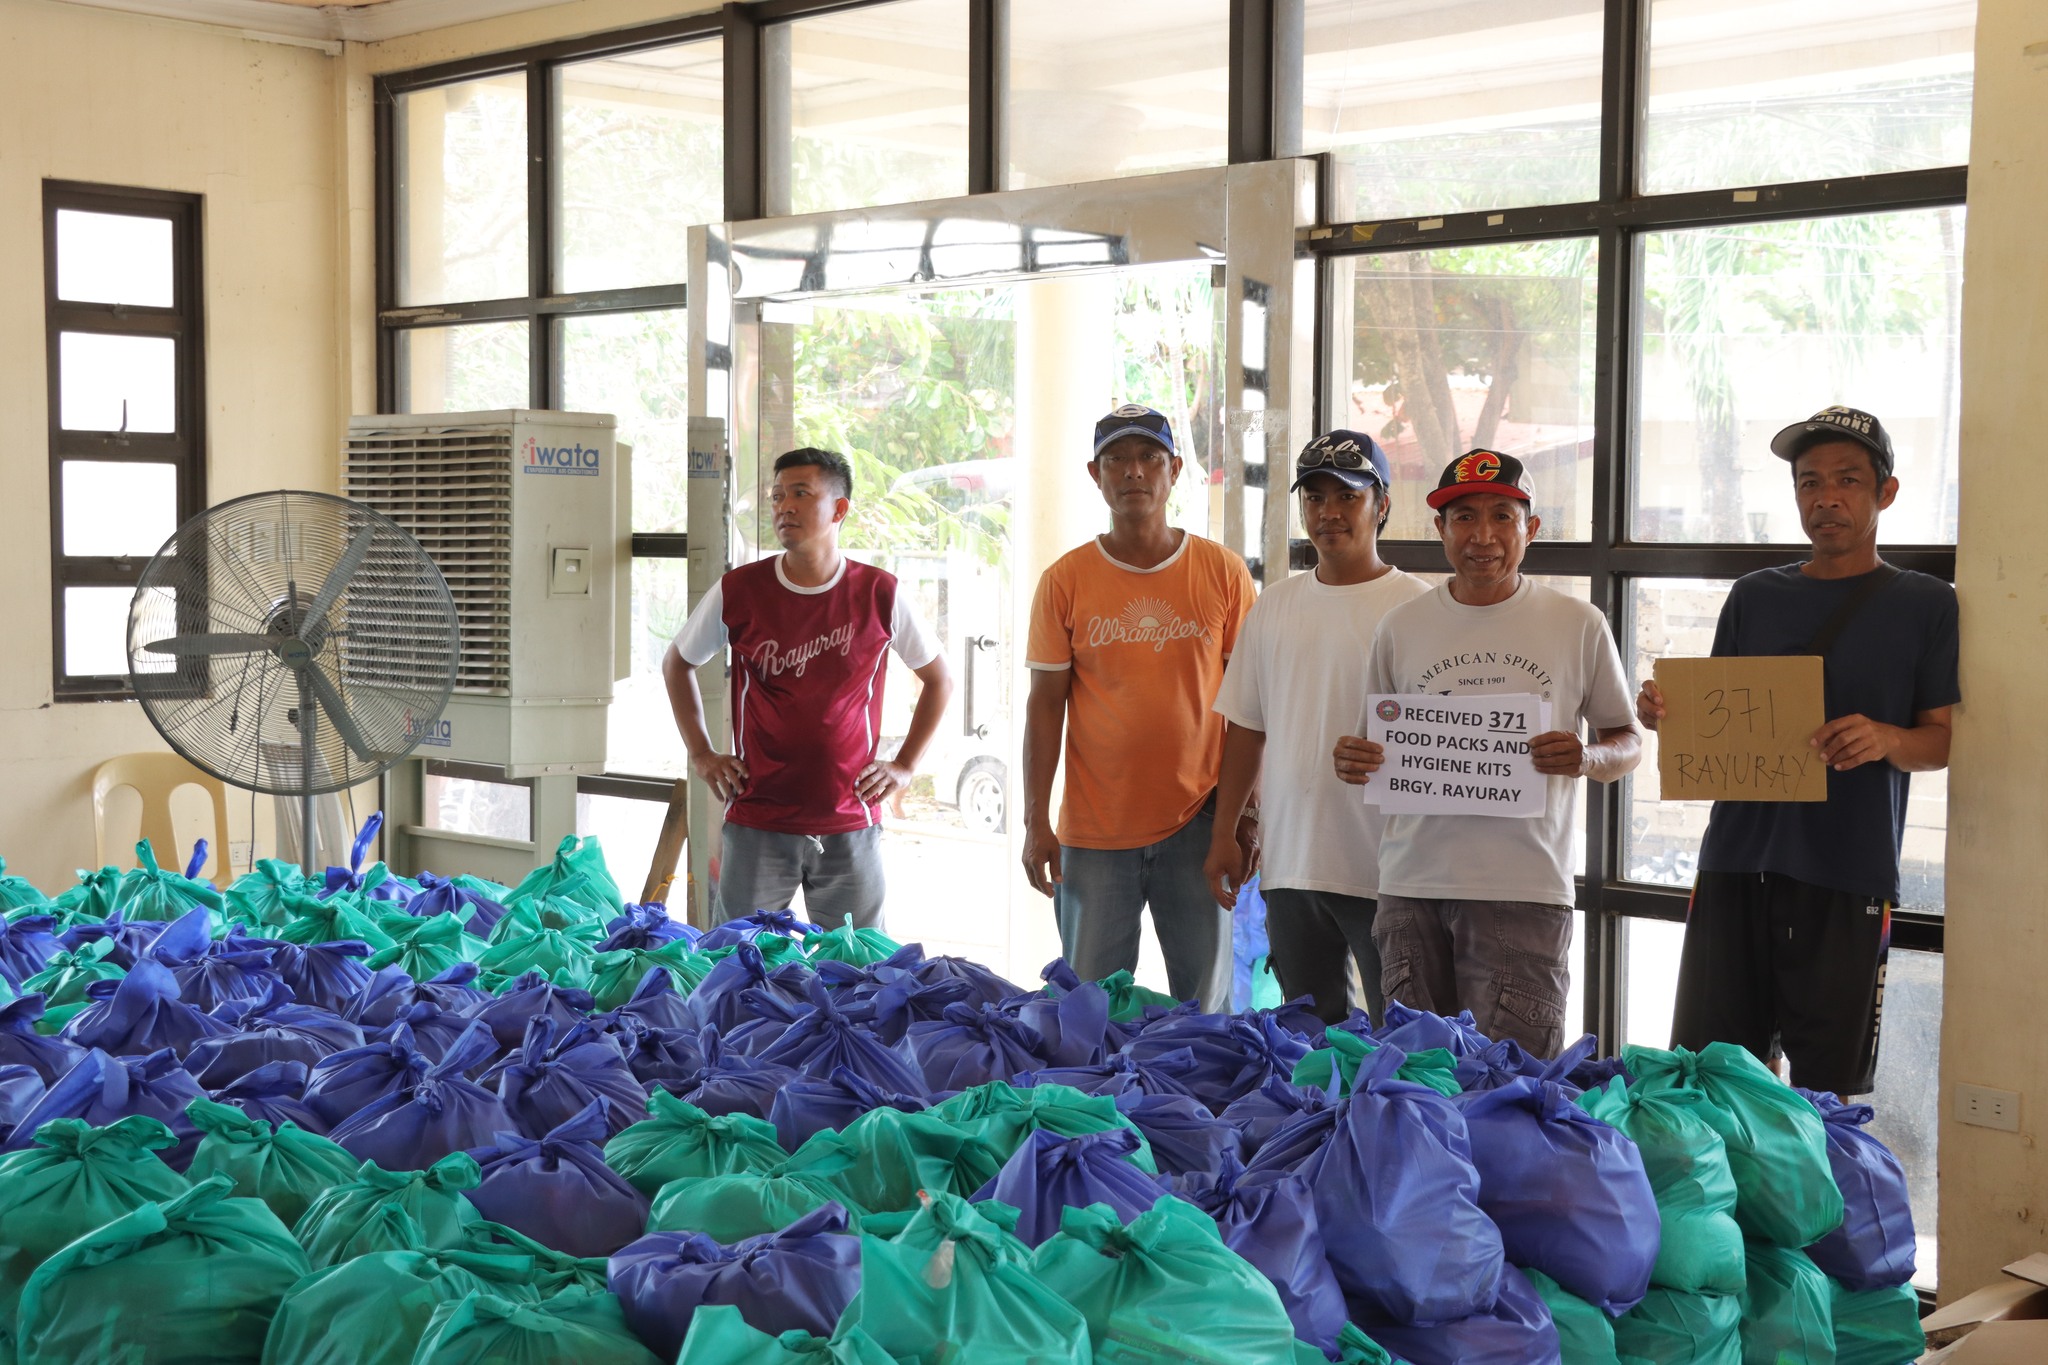 ALL FAMILIES IN BATAC, TO RECEIVE FOOD PACKS